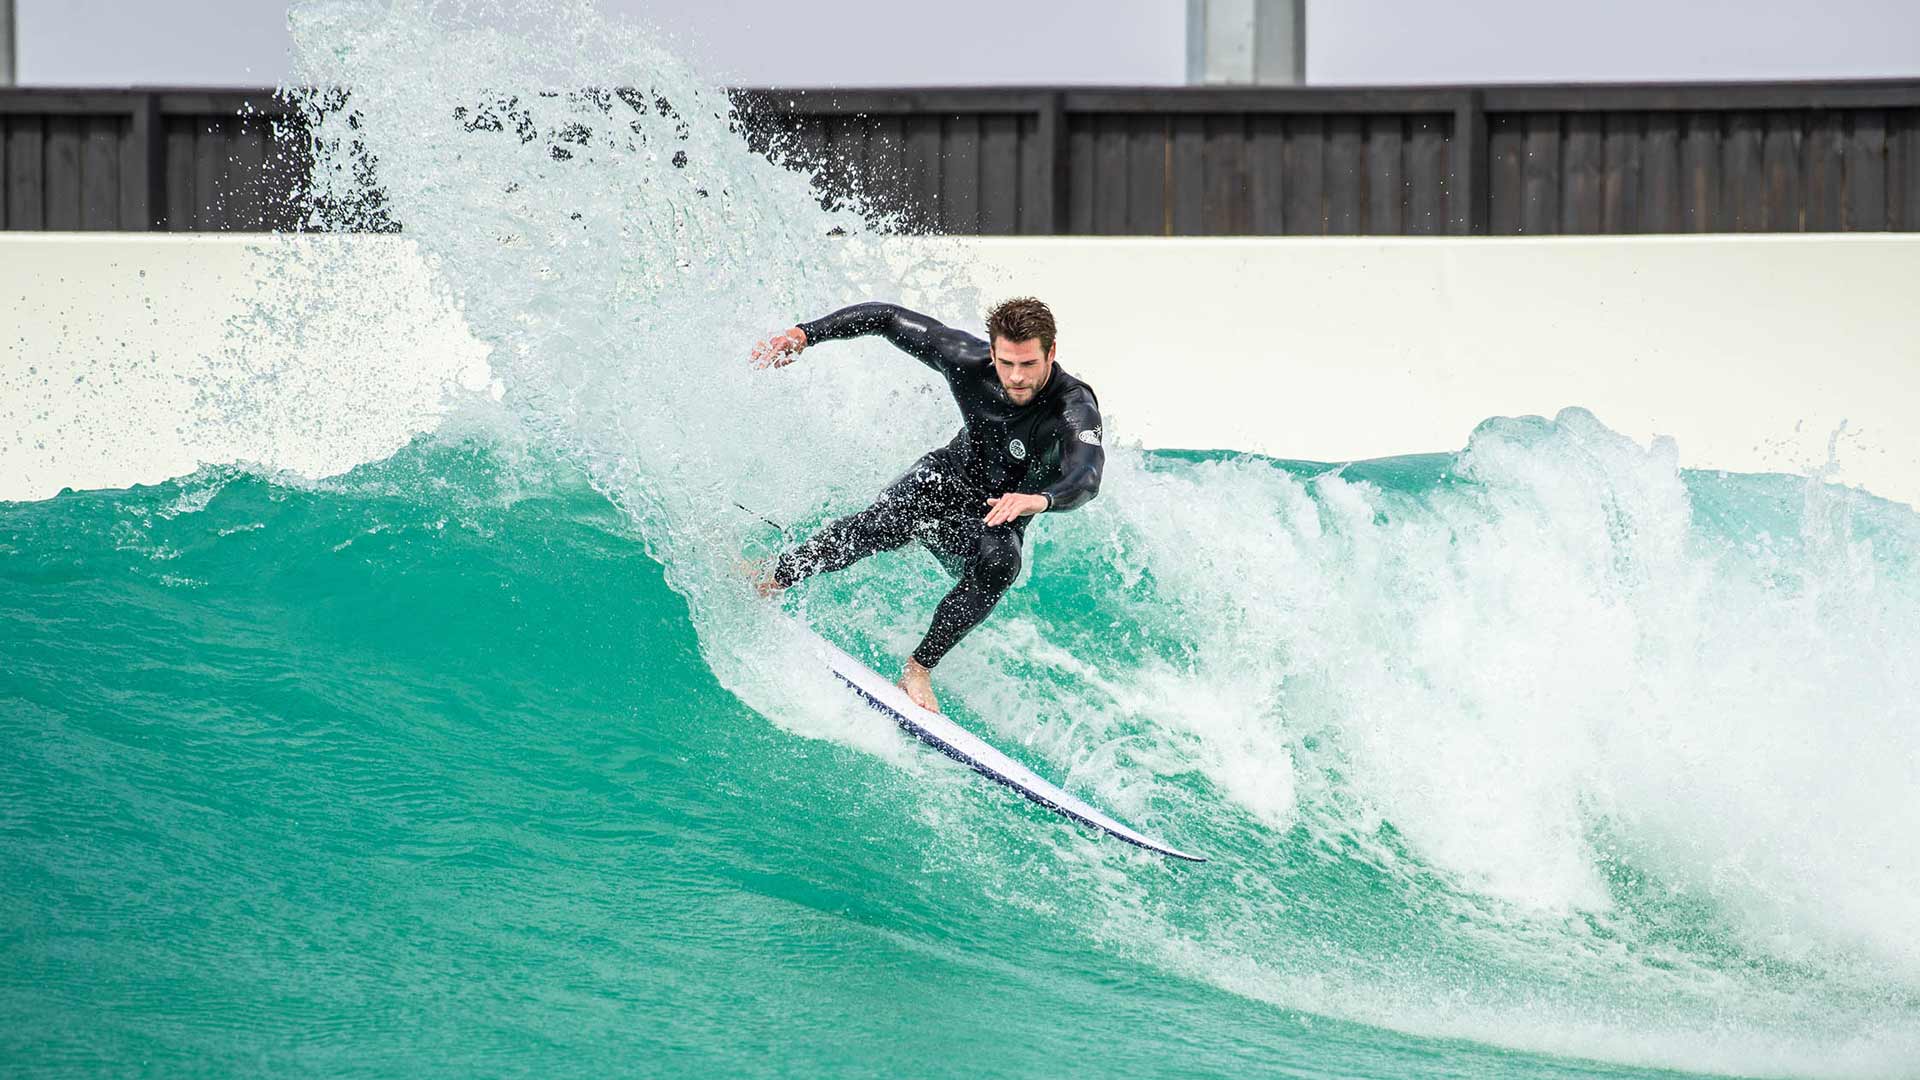 Melbourne's Long-Awaited Surf Park Urbnsurf Is Finally Opening This January